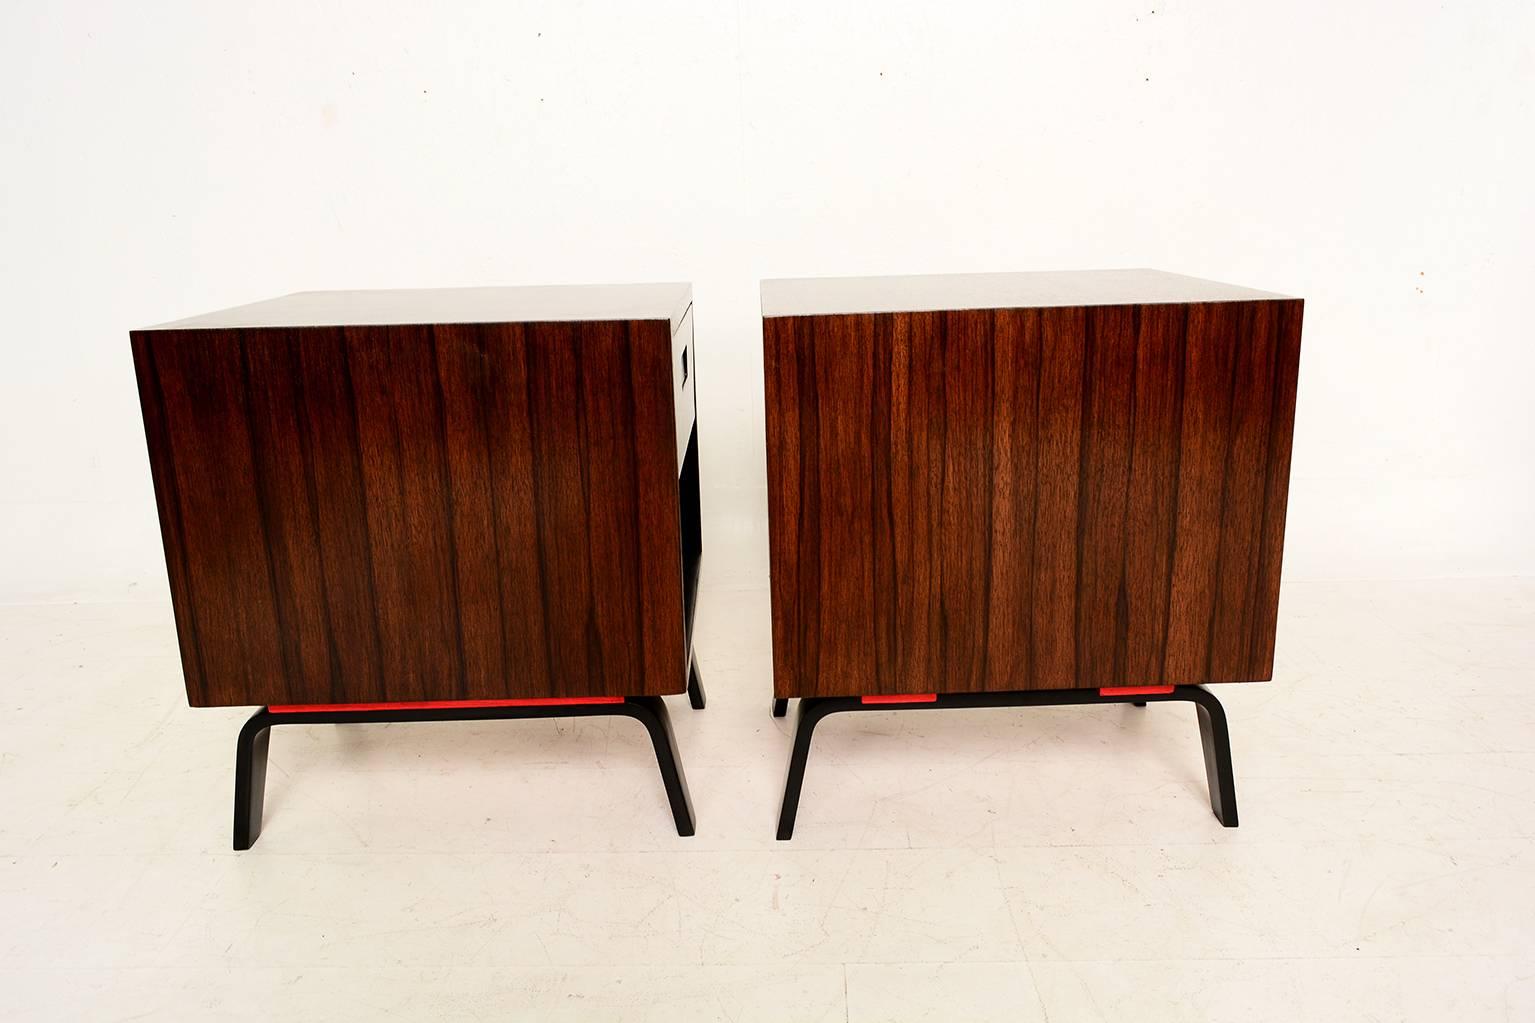 American Mid-Century Modern Nightstands by Clifford Pascoe